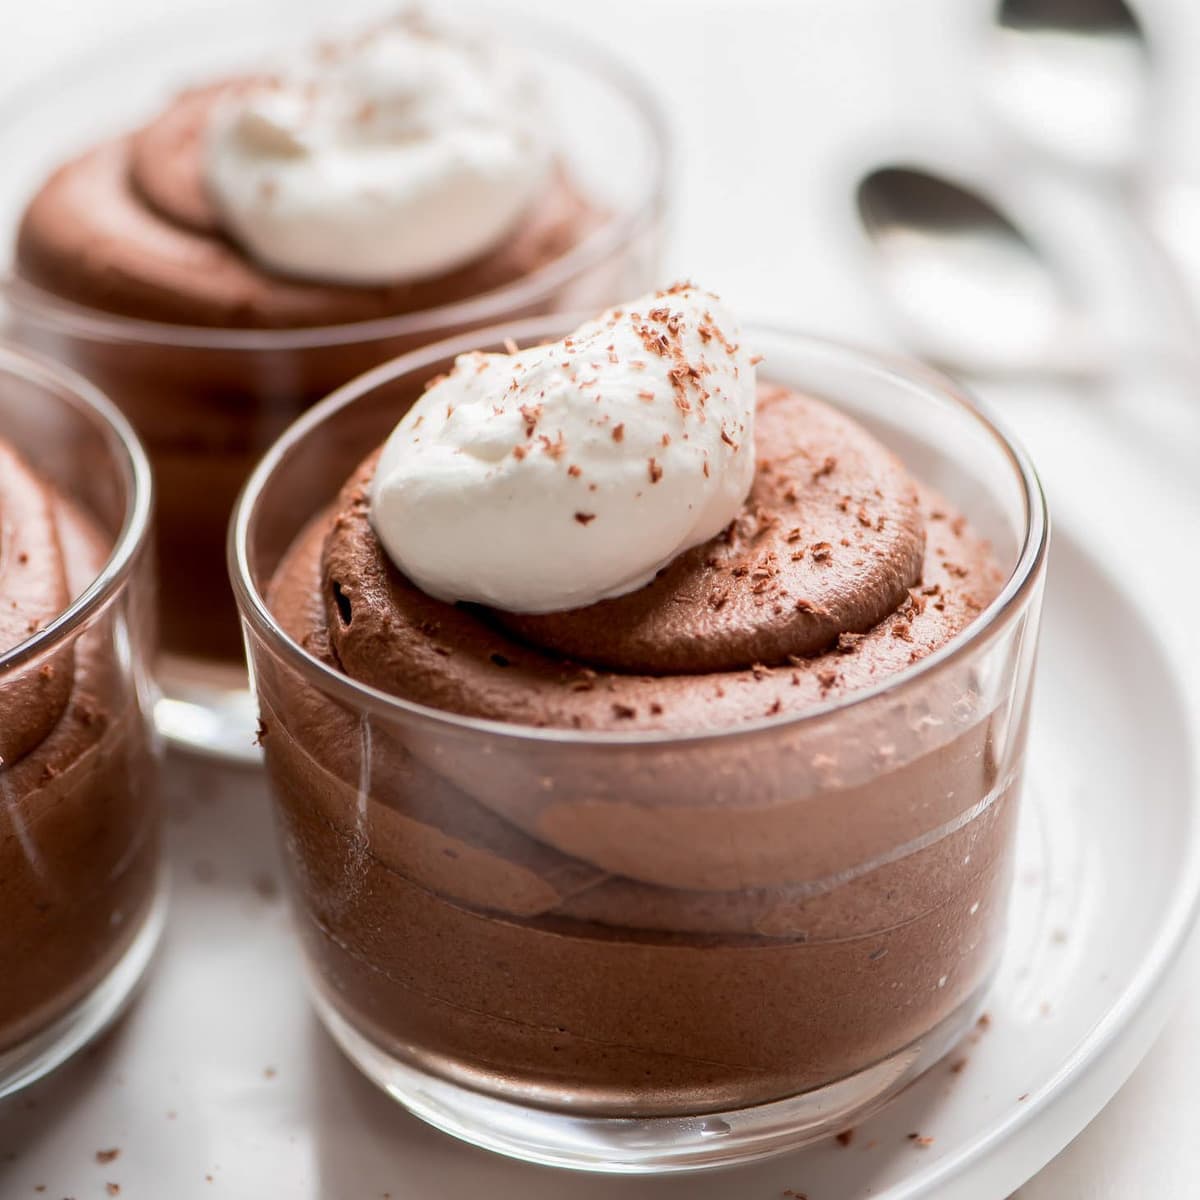 Chocolate Mousse on glass dishes